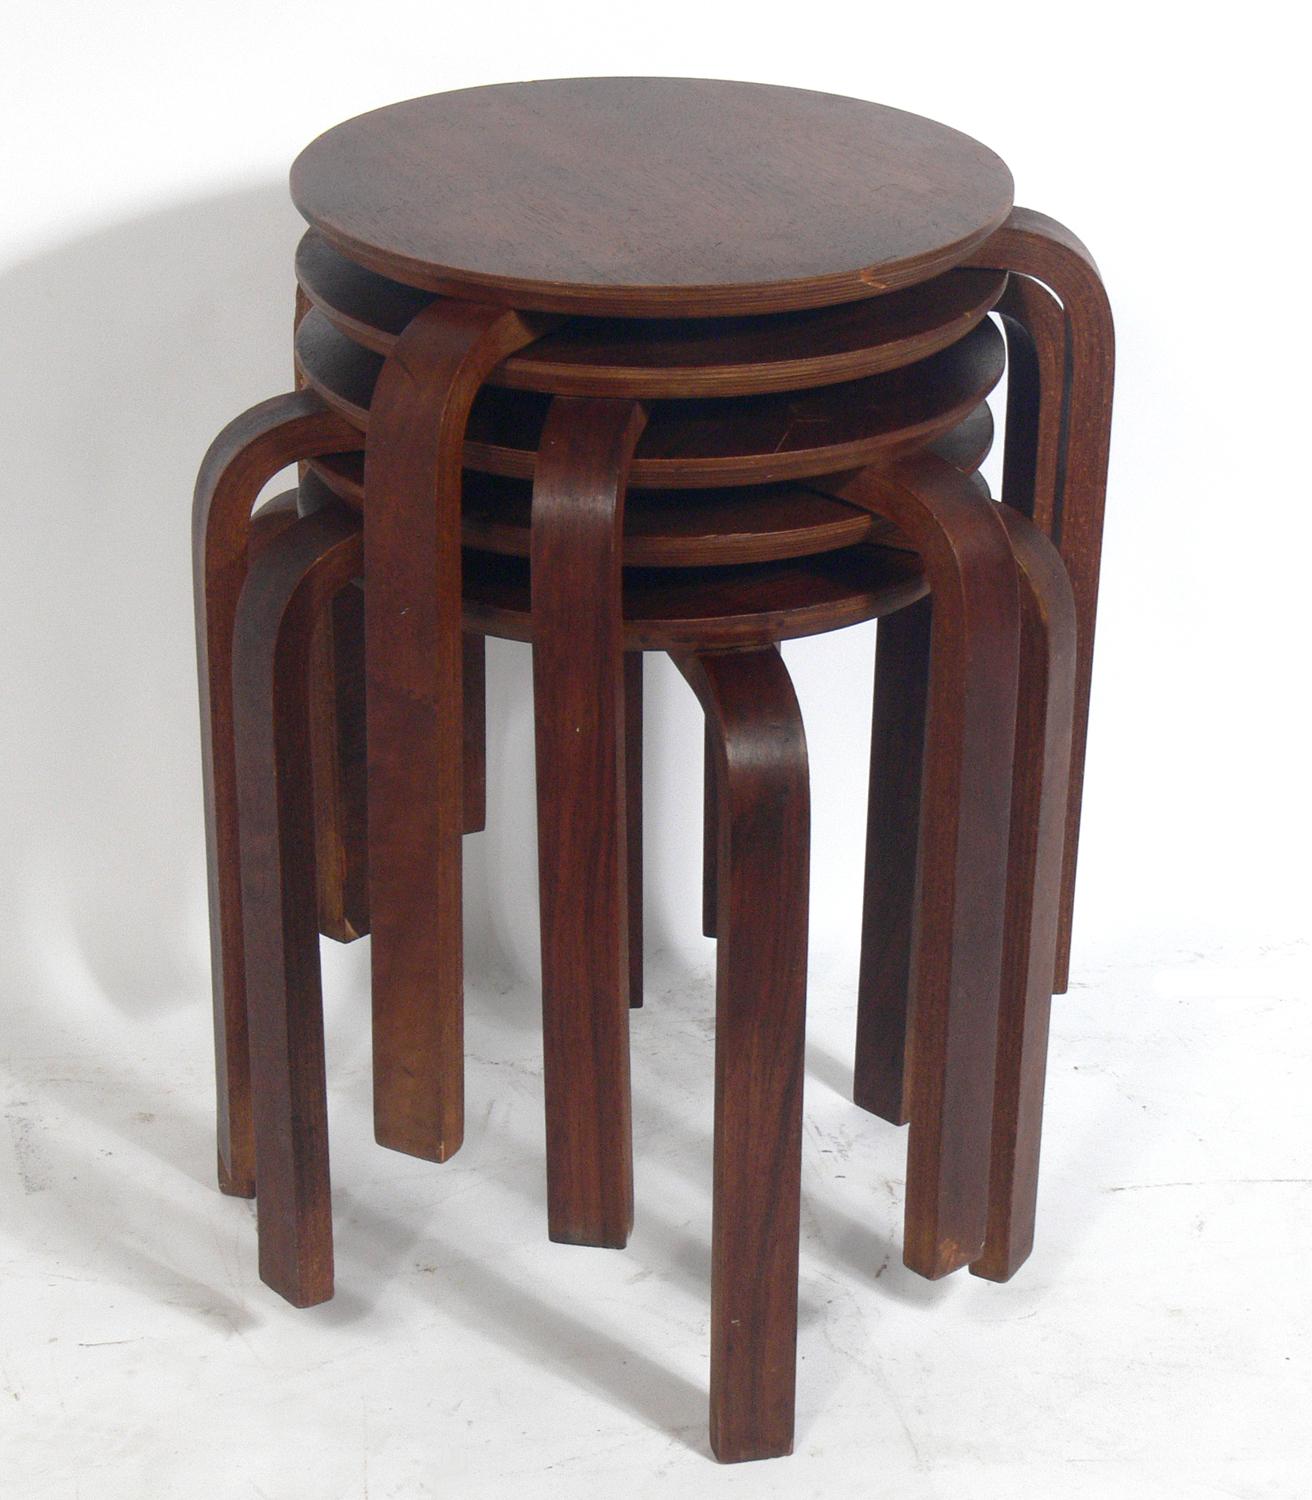 Five Bentwood Stacking tables or stools in the manner of Alvar Aalto, circa 1950s. These tables are currently being refinished and can be completed in your choice of color. The price noted includes refinishing in your choice of color.